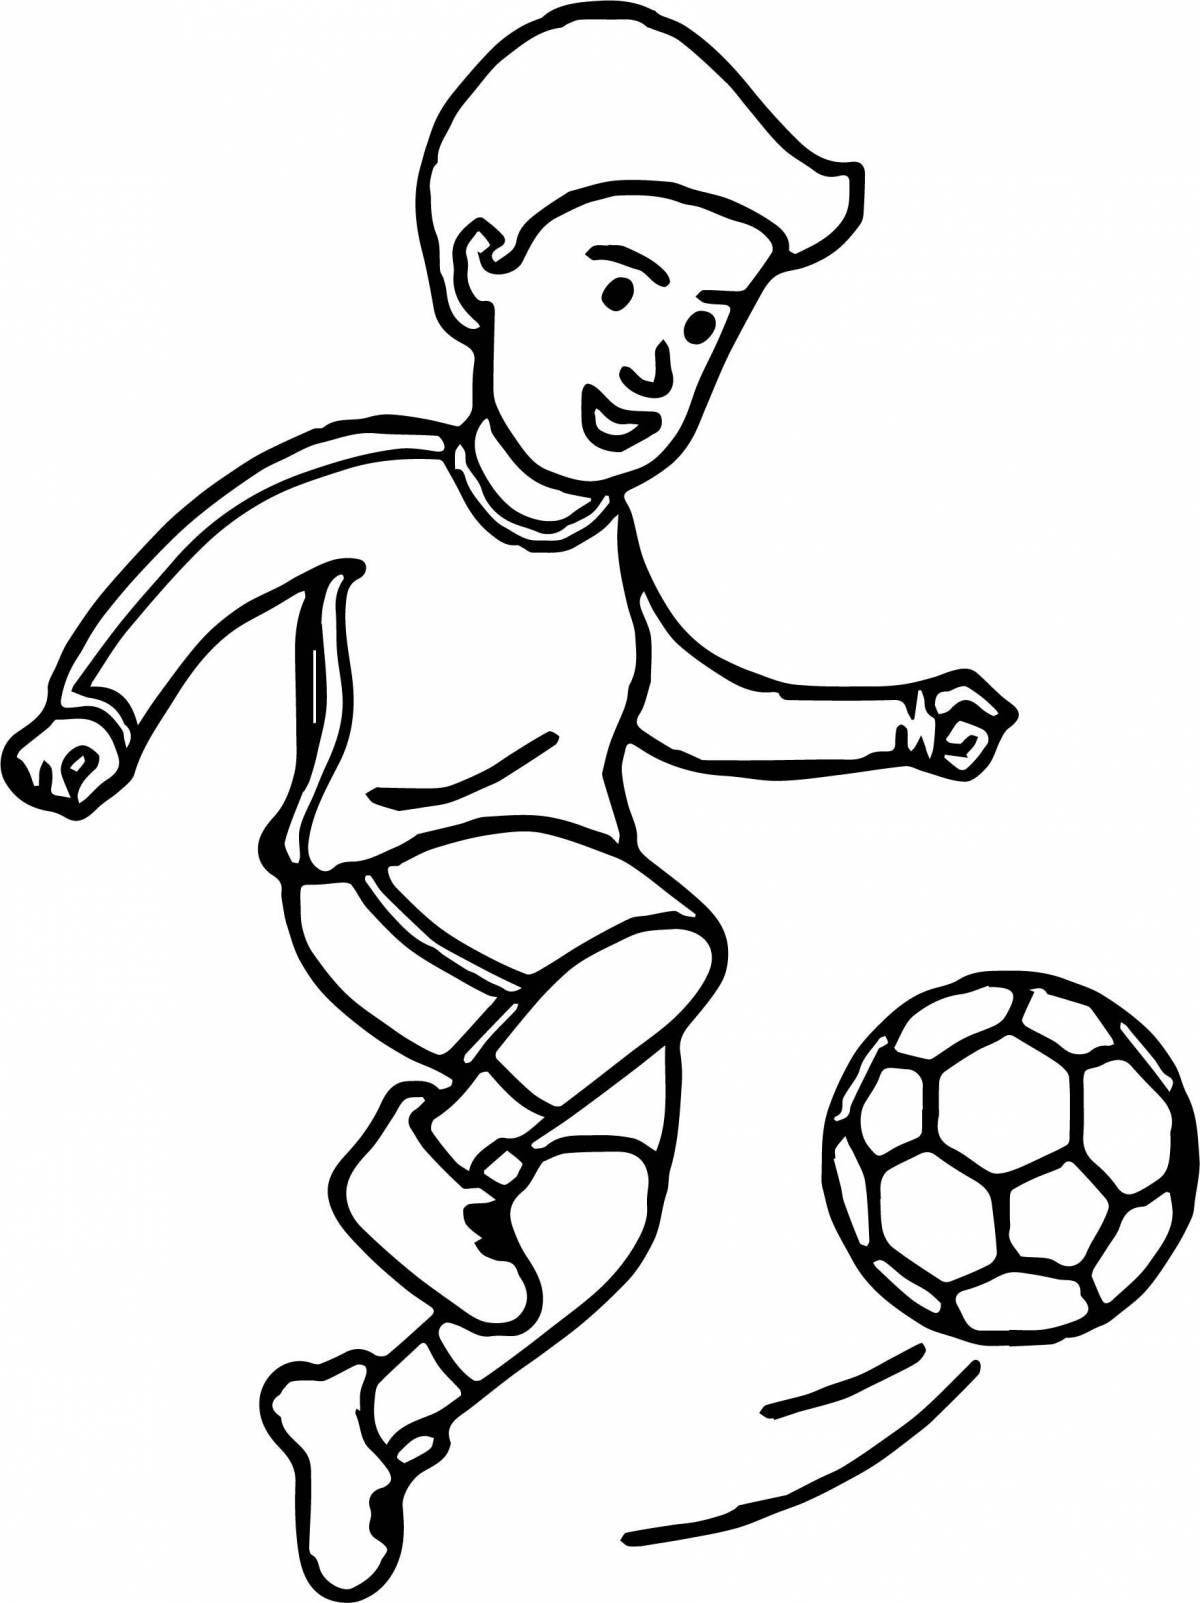 Coloring book bright soccer player for kids